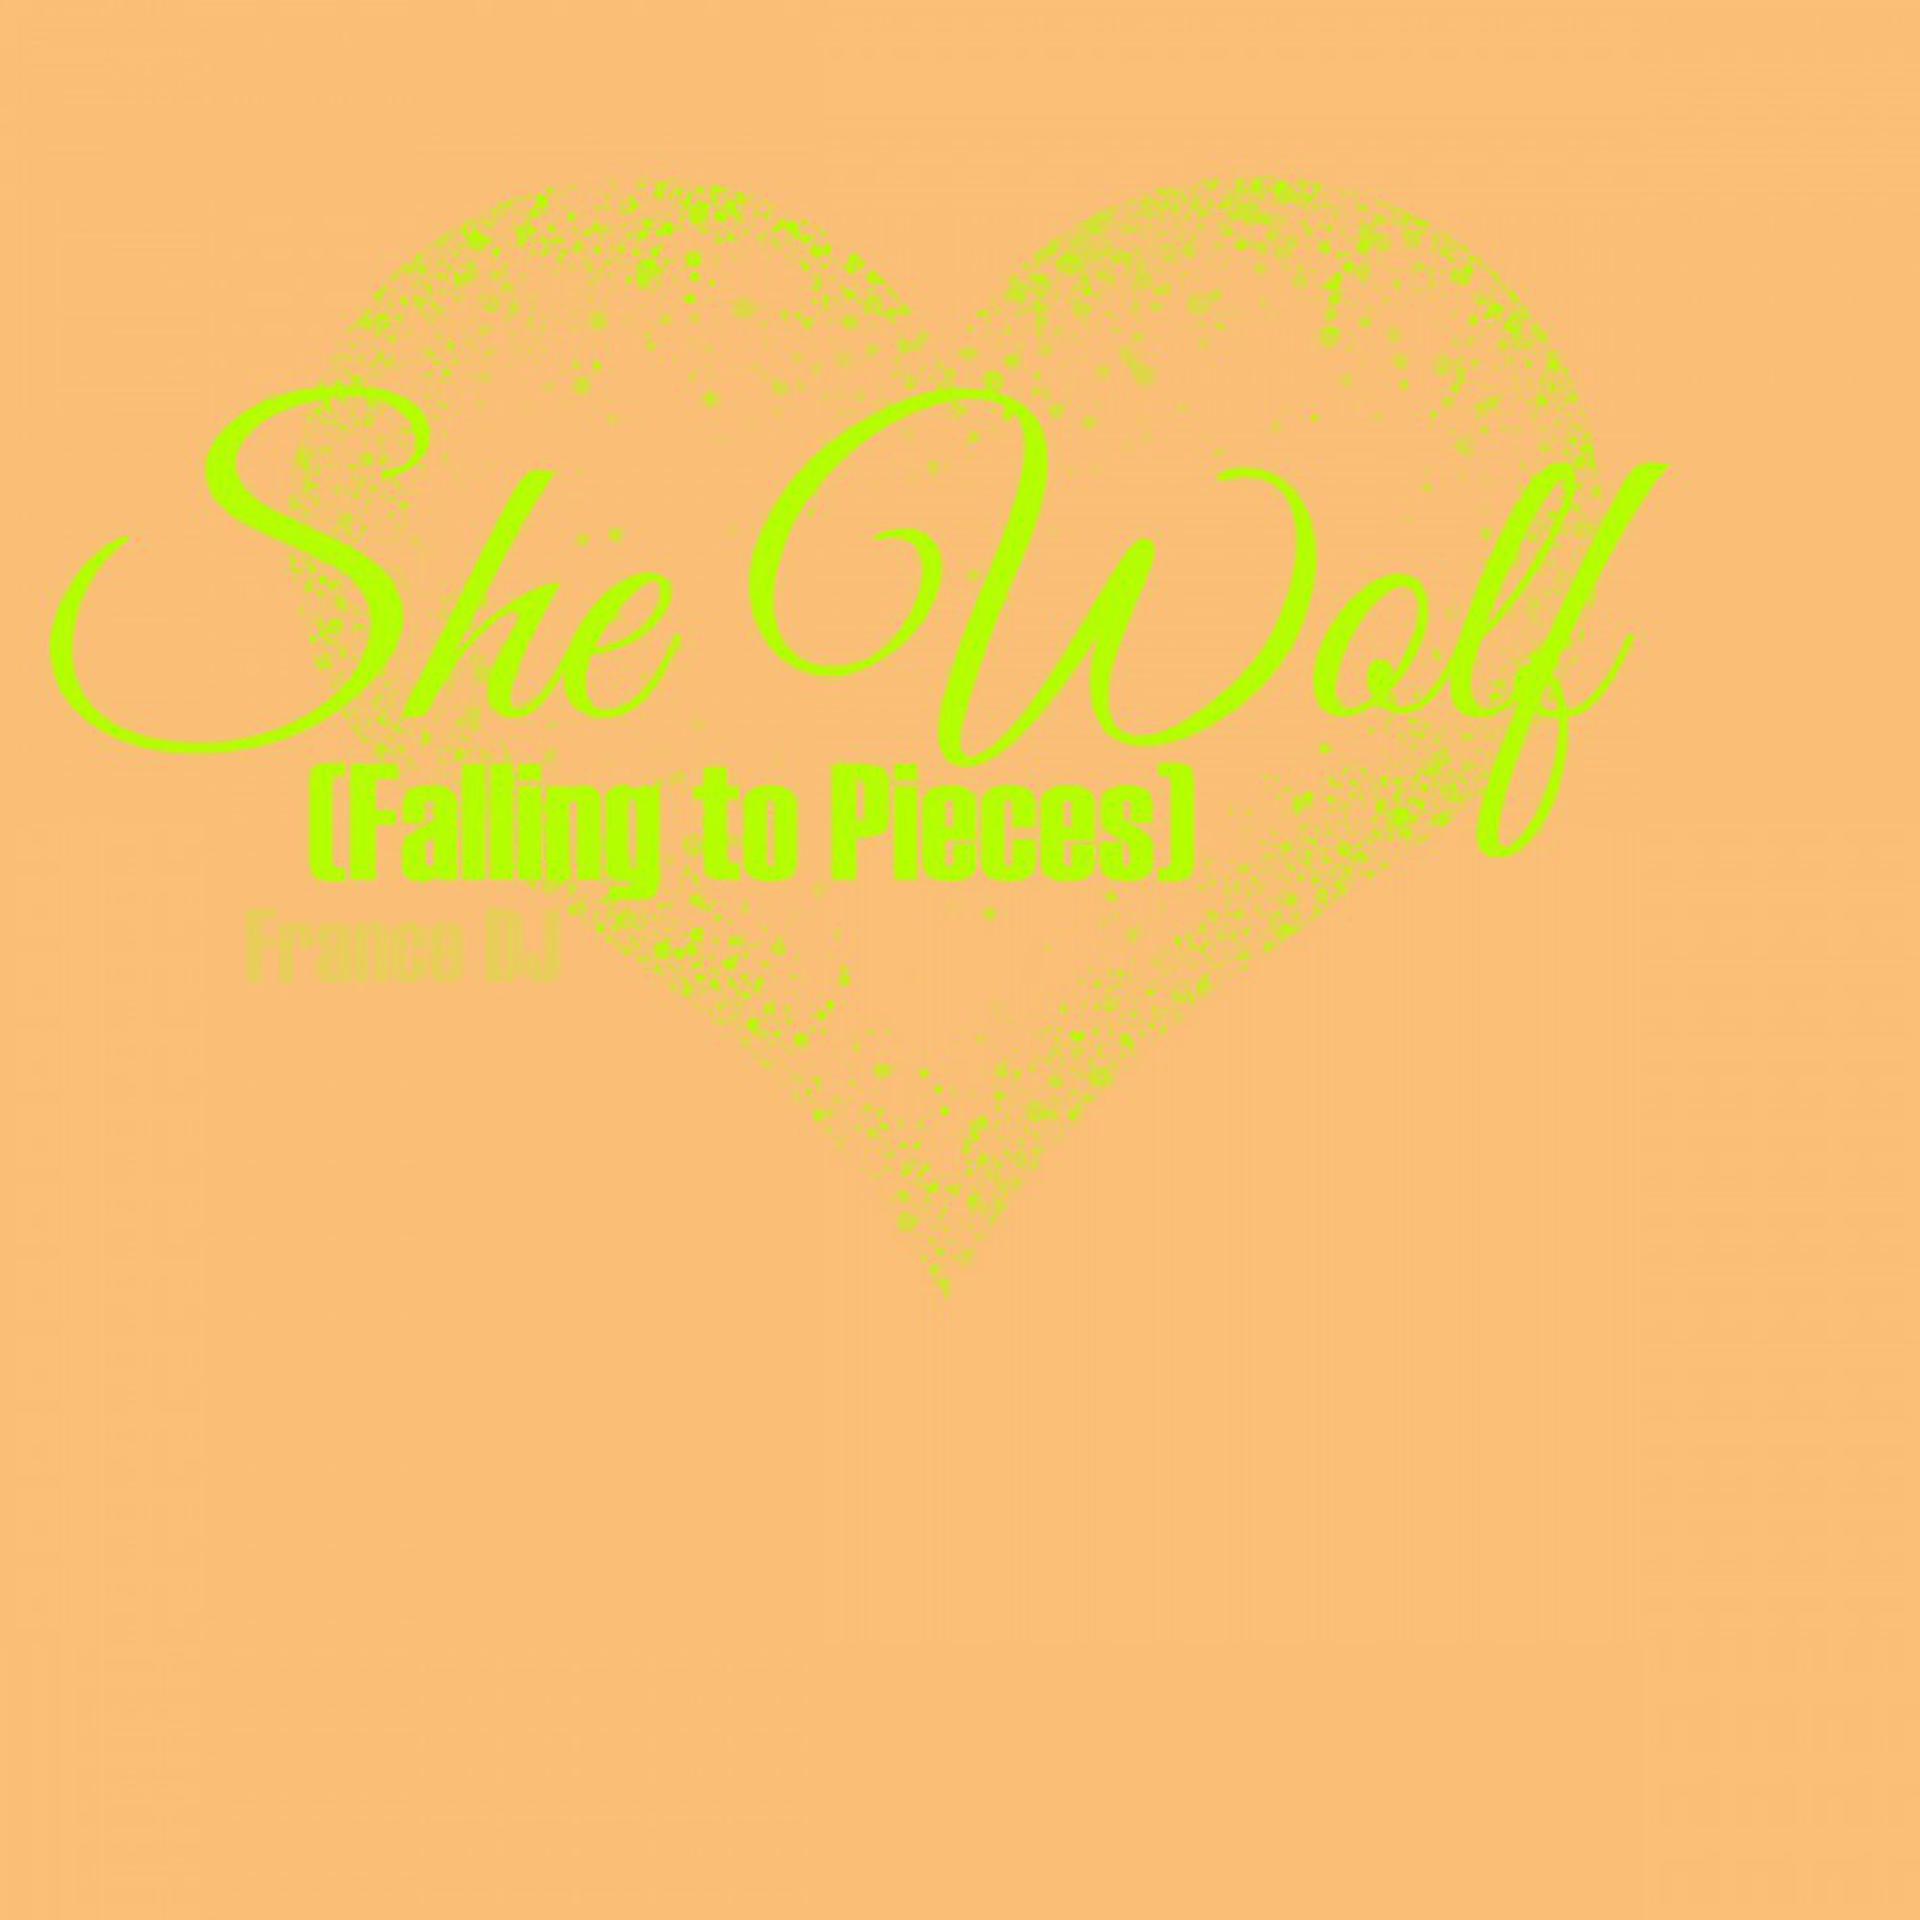 Постер альбома She Wolf (Falling to Pieces)